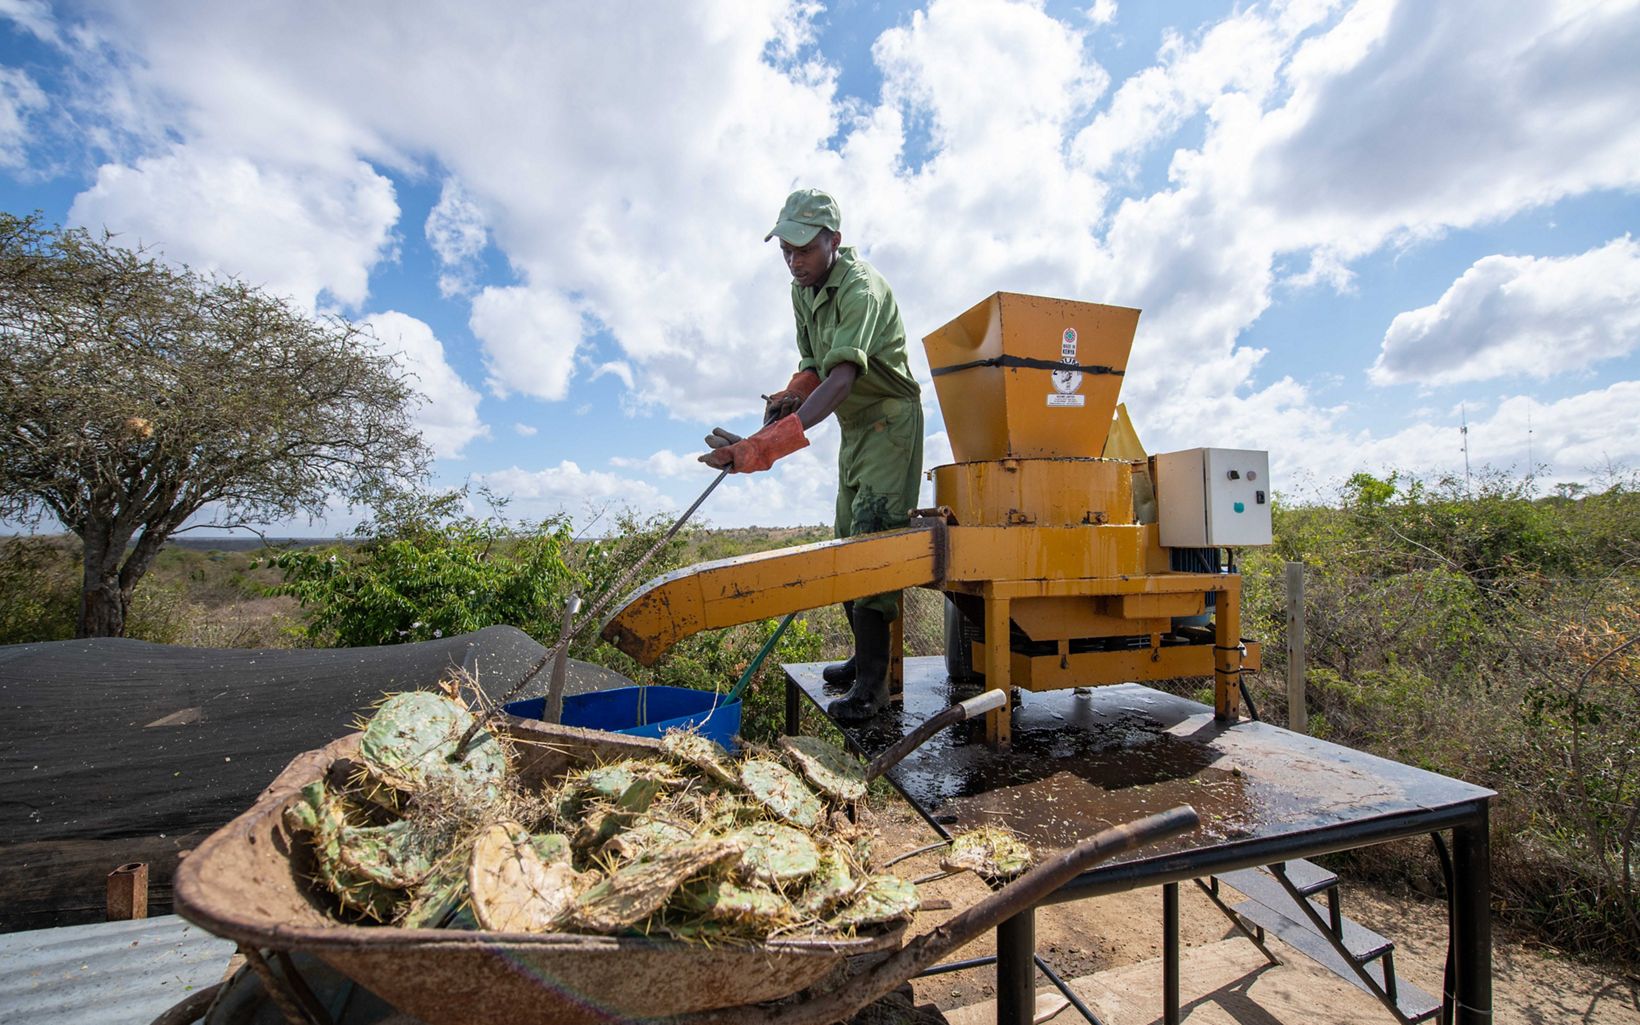 Plant Fuel Peter Eloto puts uprooted cactuses into a biodigester, which turns them into cooking gas. When the opuntia is fully eradicated, it can be used with any other biological waste. © Roshni Lodhia